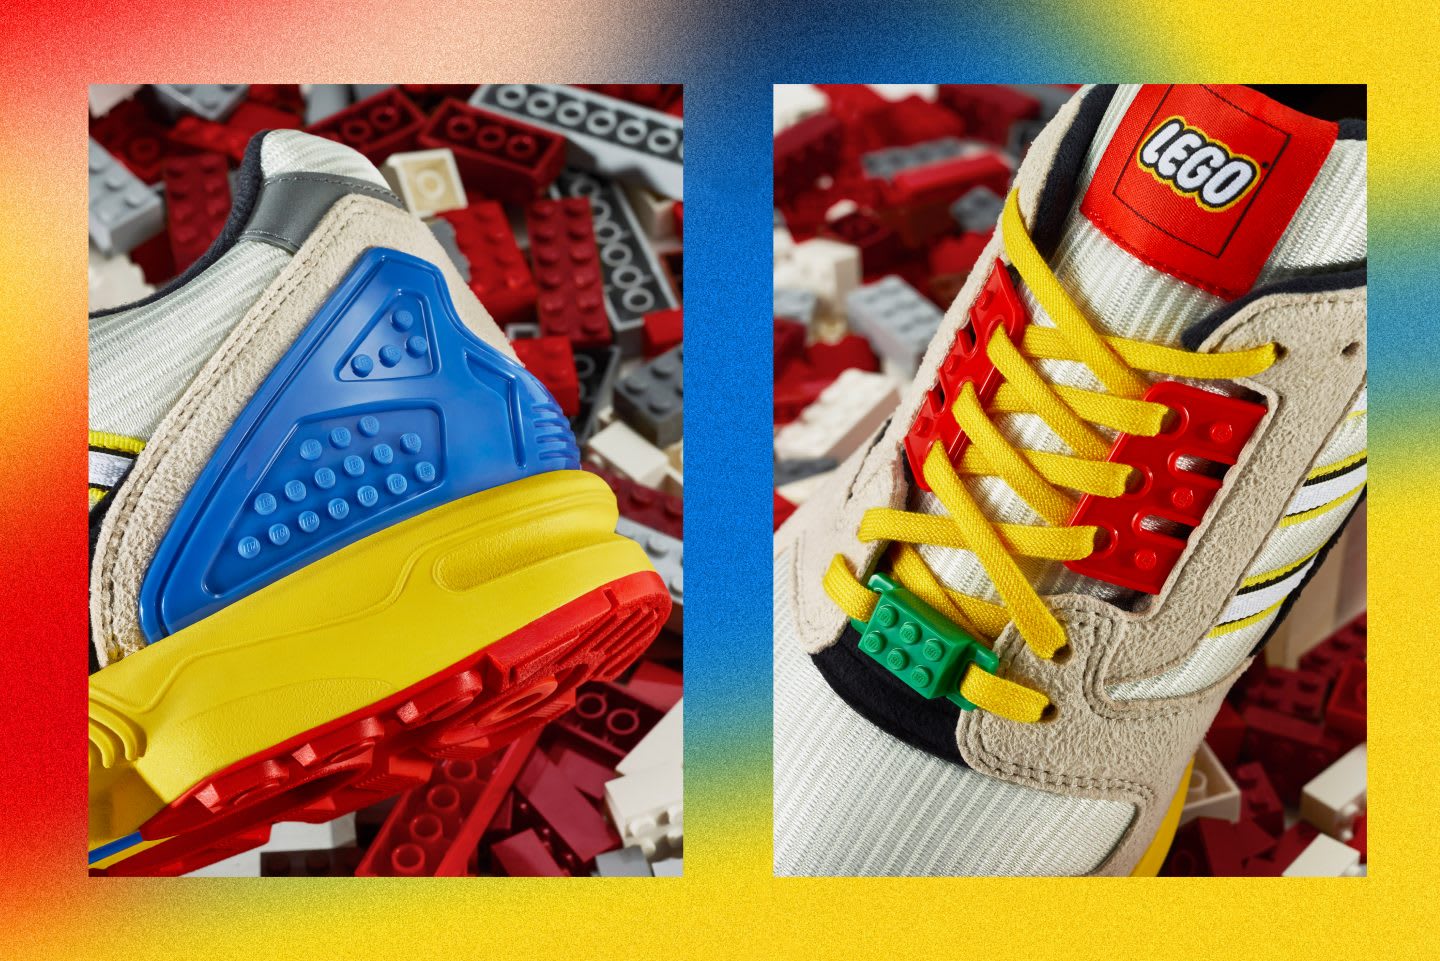 Shoes with primary colors on top of Lego toy bricks, adidas, LEGO partnership, collaboration ZX8000, shoes, Originals